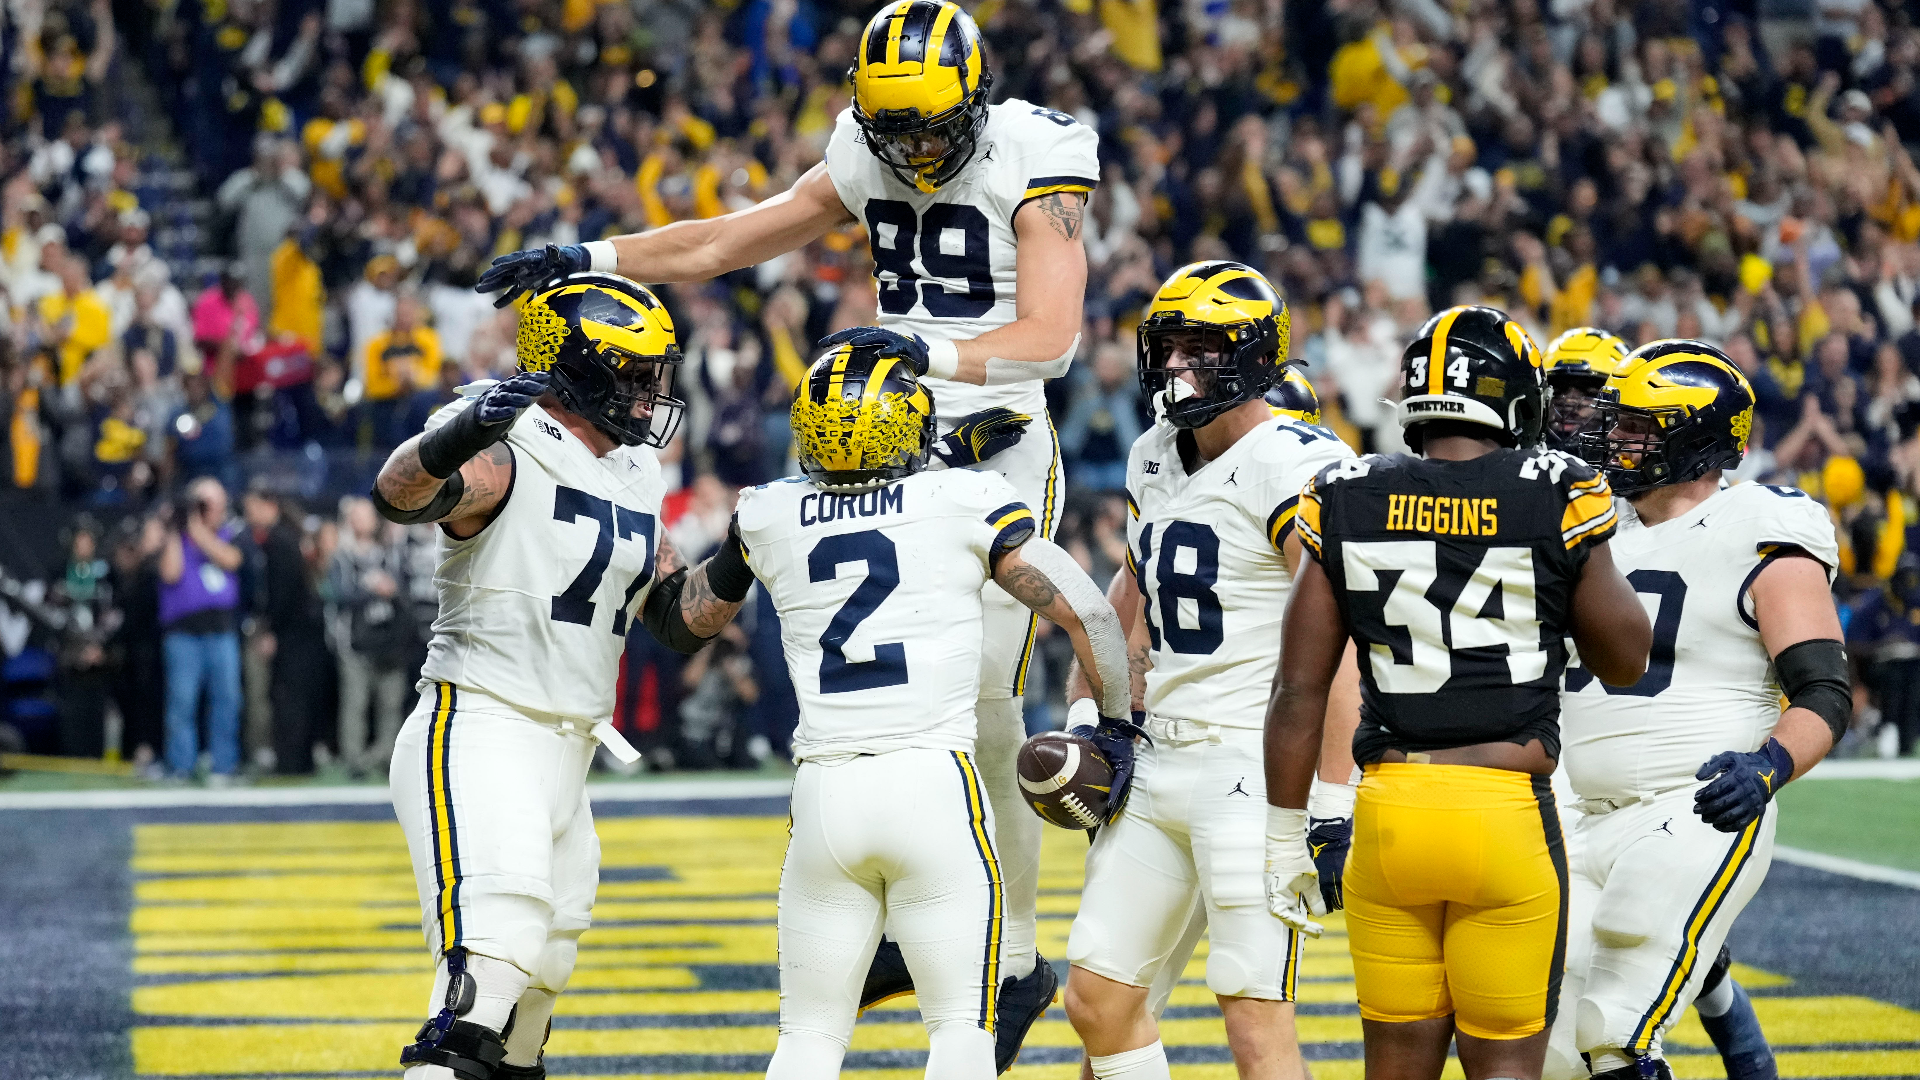 Michigan closed it out with three field goals, the final one being a 50-yarder from James Turner to set a title-game record.